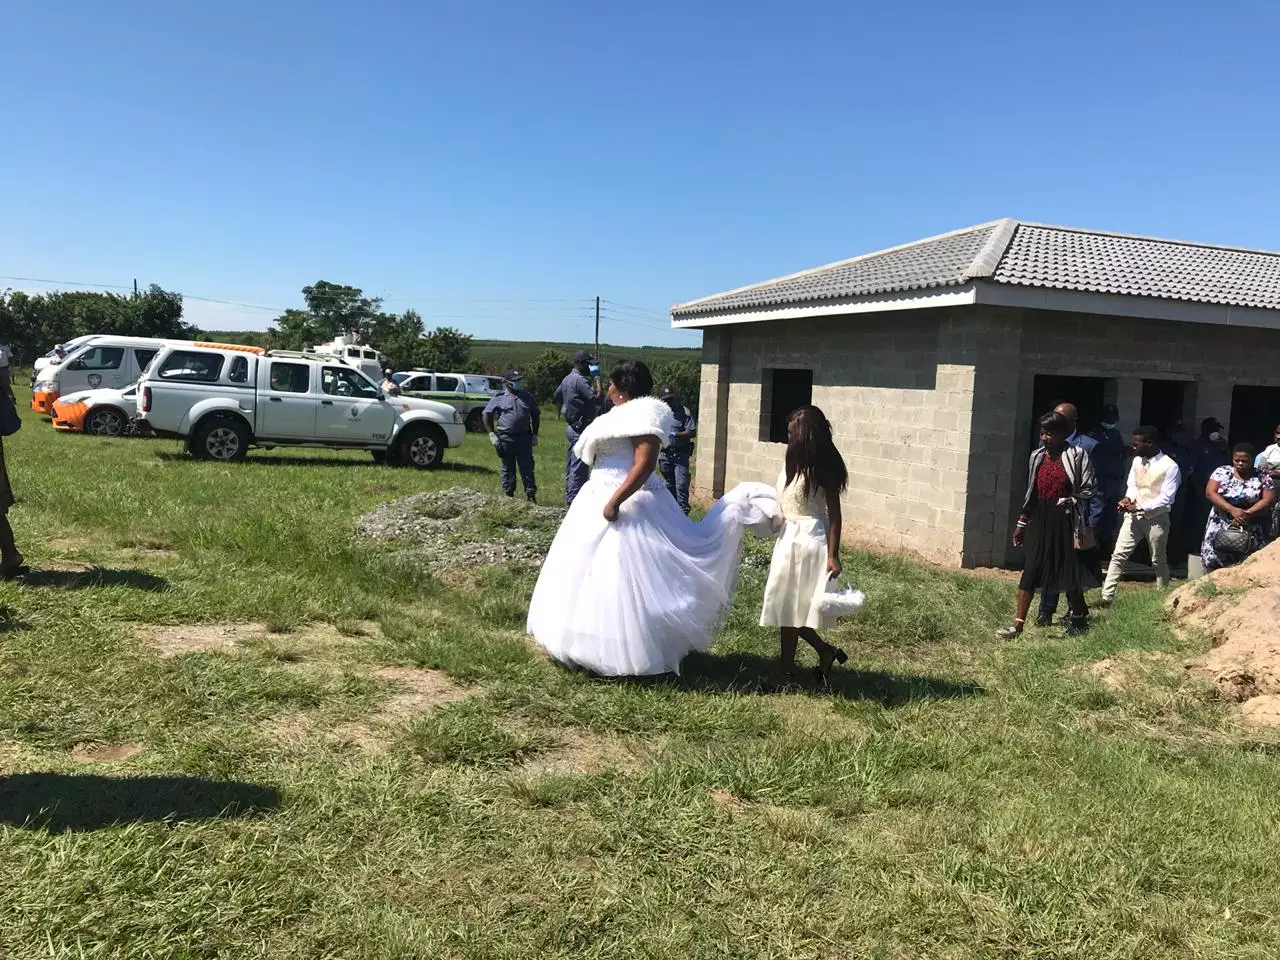 A bride and groom were arrested after their ceremony breached South Africa's strict lockdown measures.